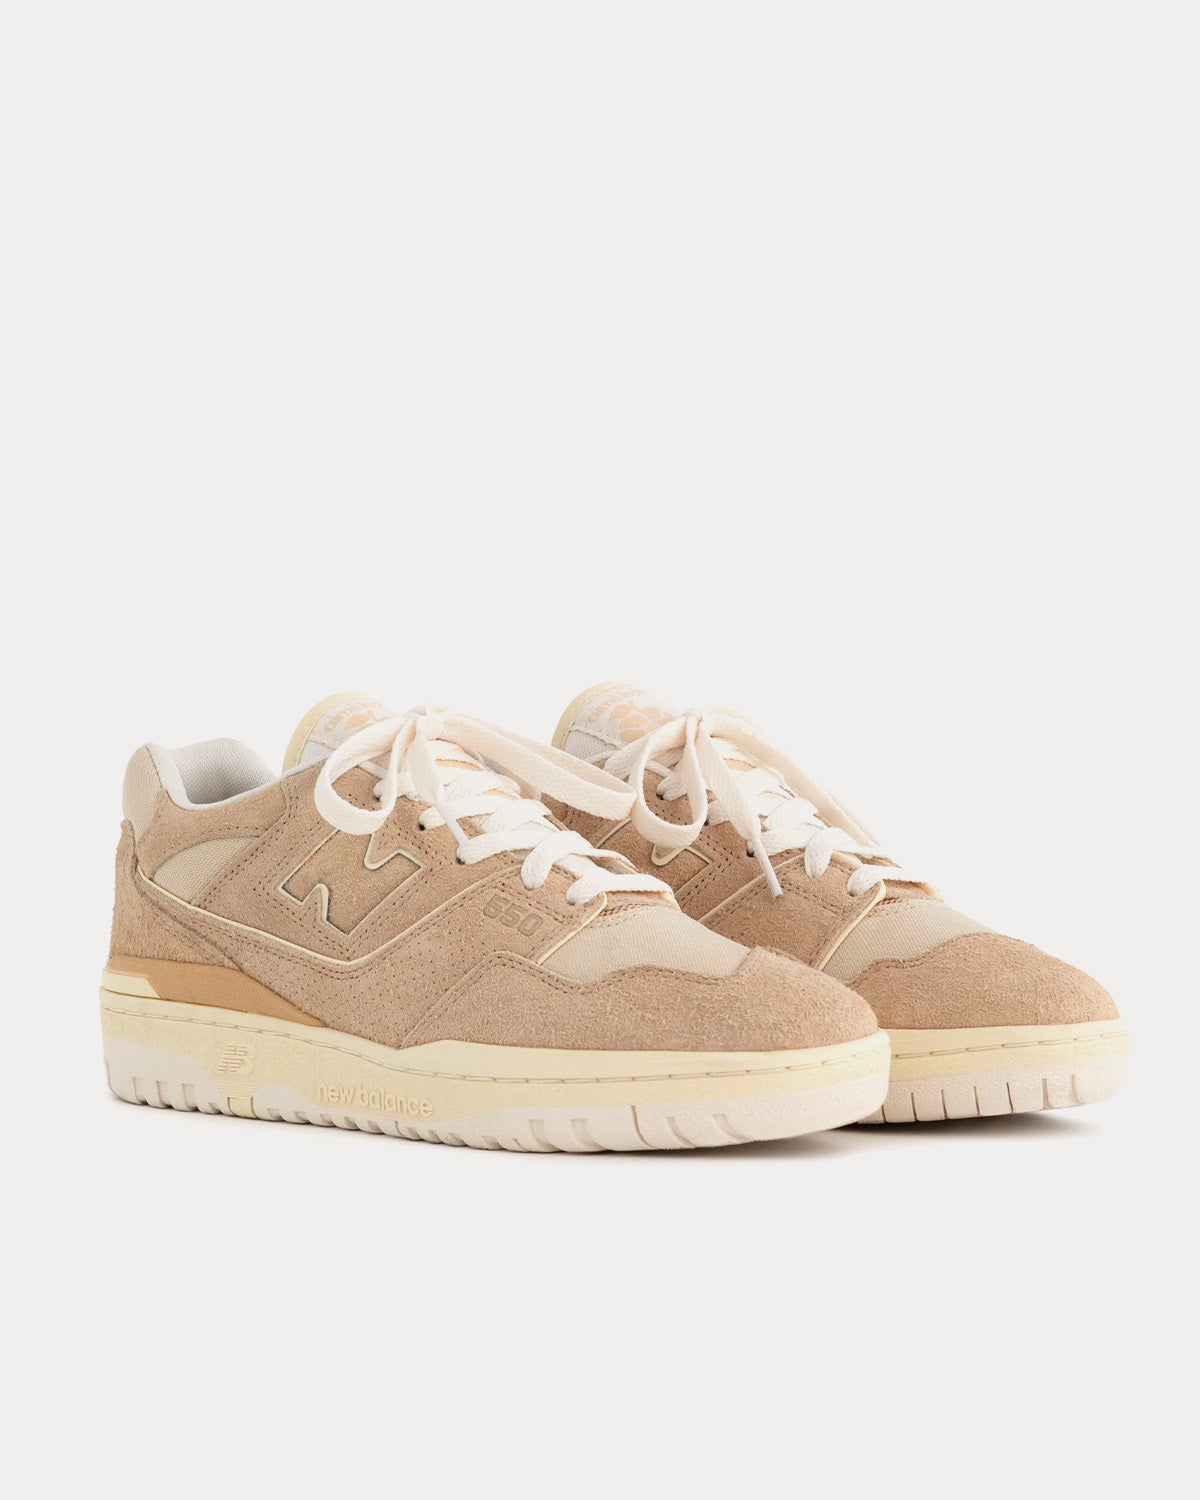 New Balance x Aime Leon Dore - P550 Basketball Oxfords Taupe Low Top Sneakers